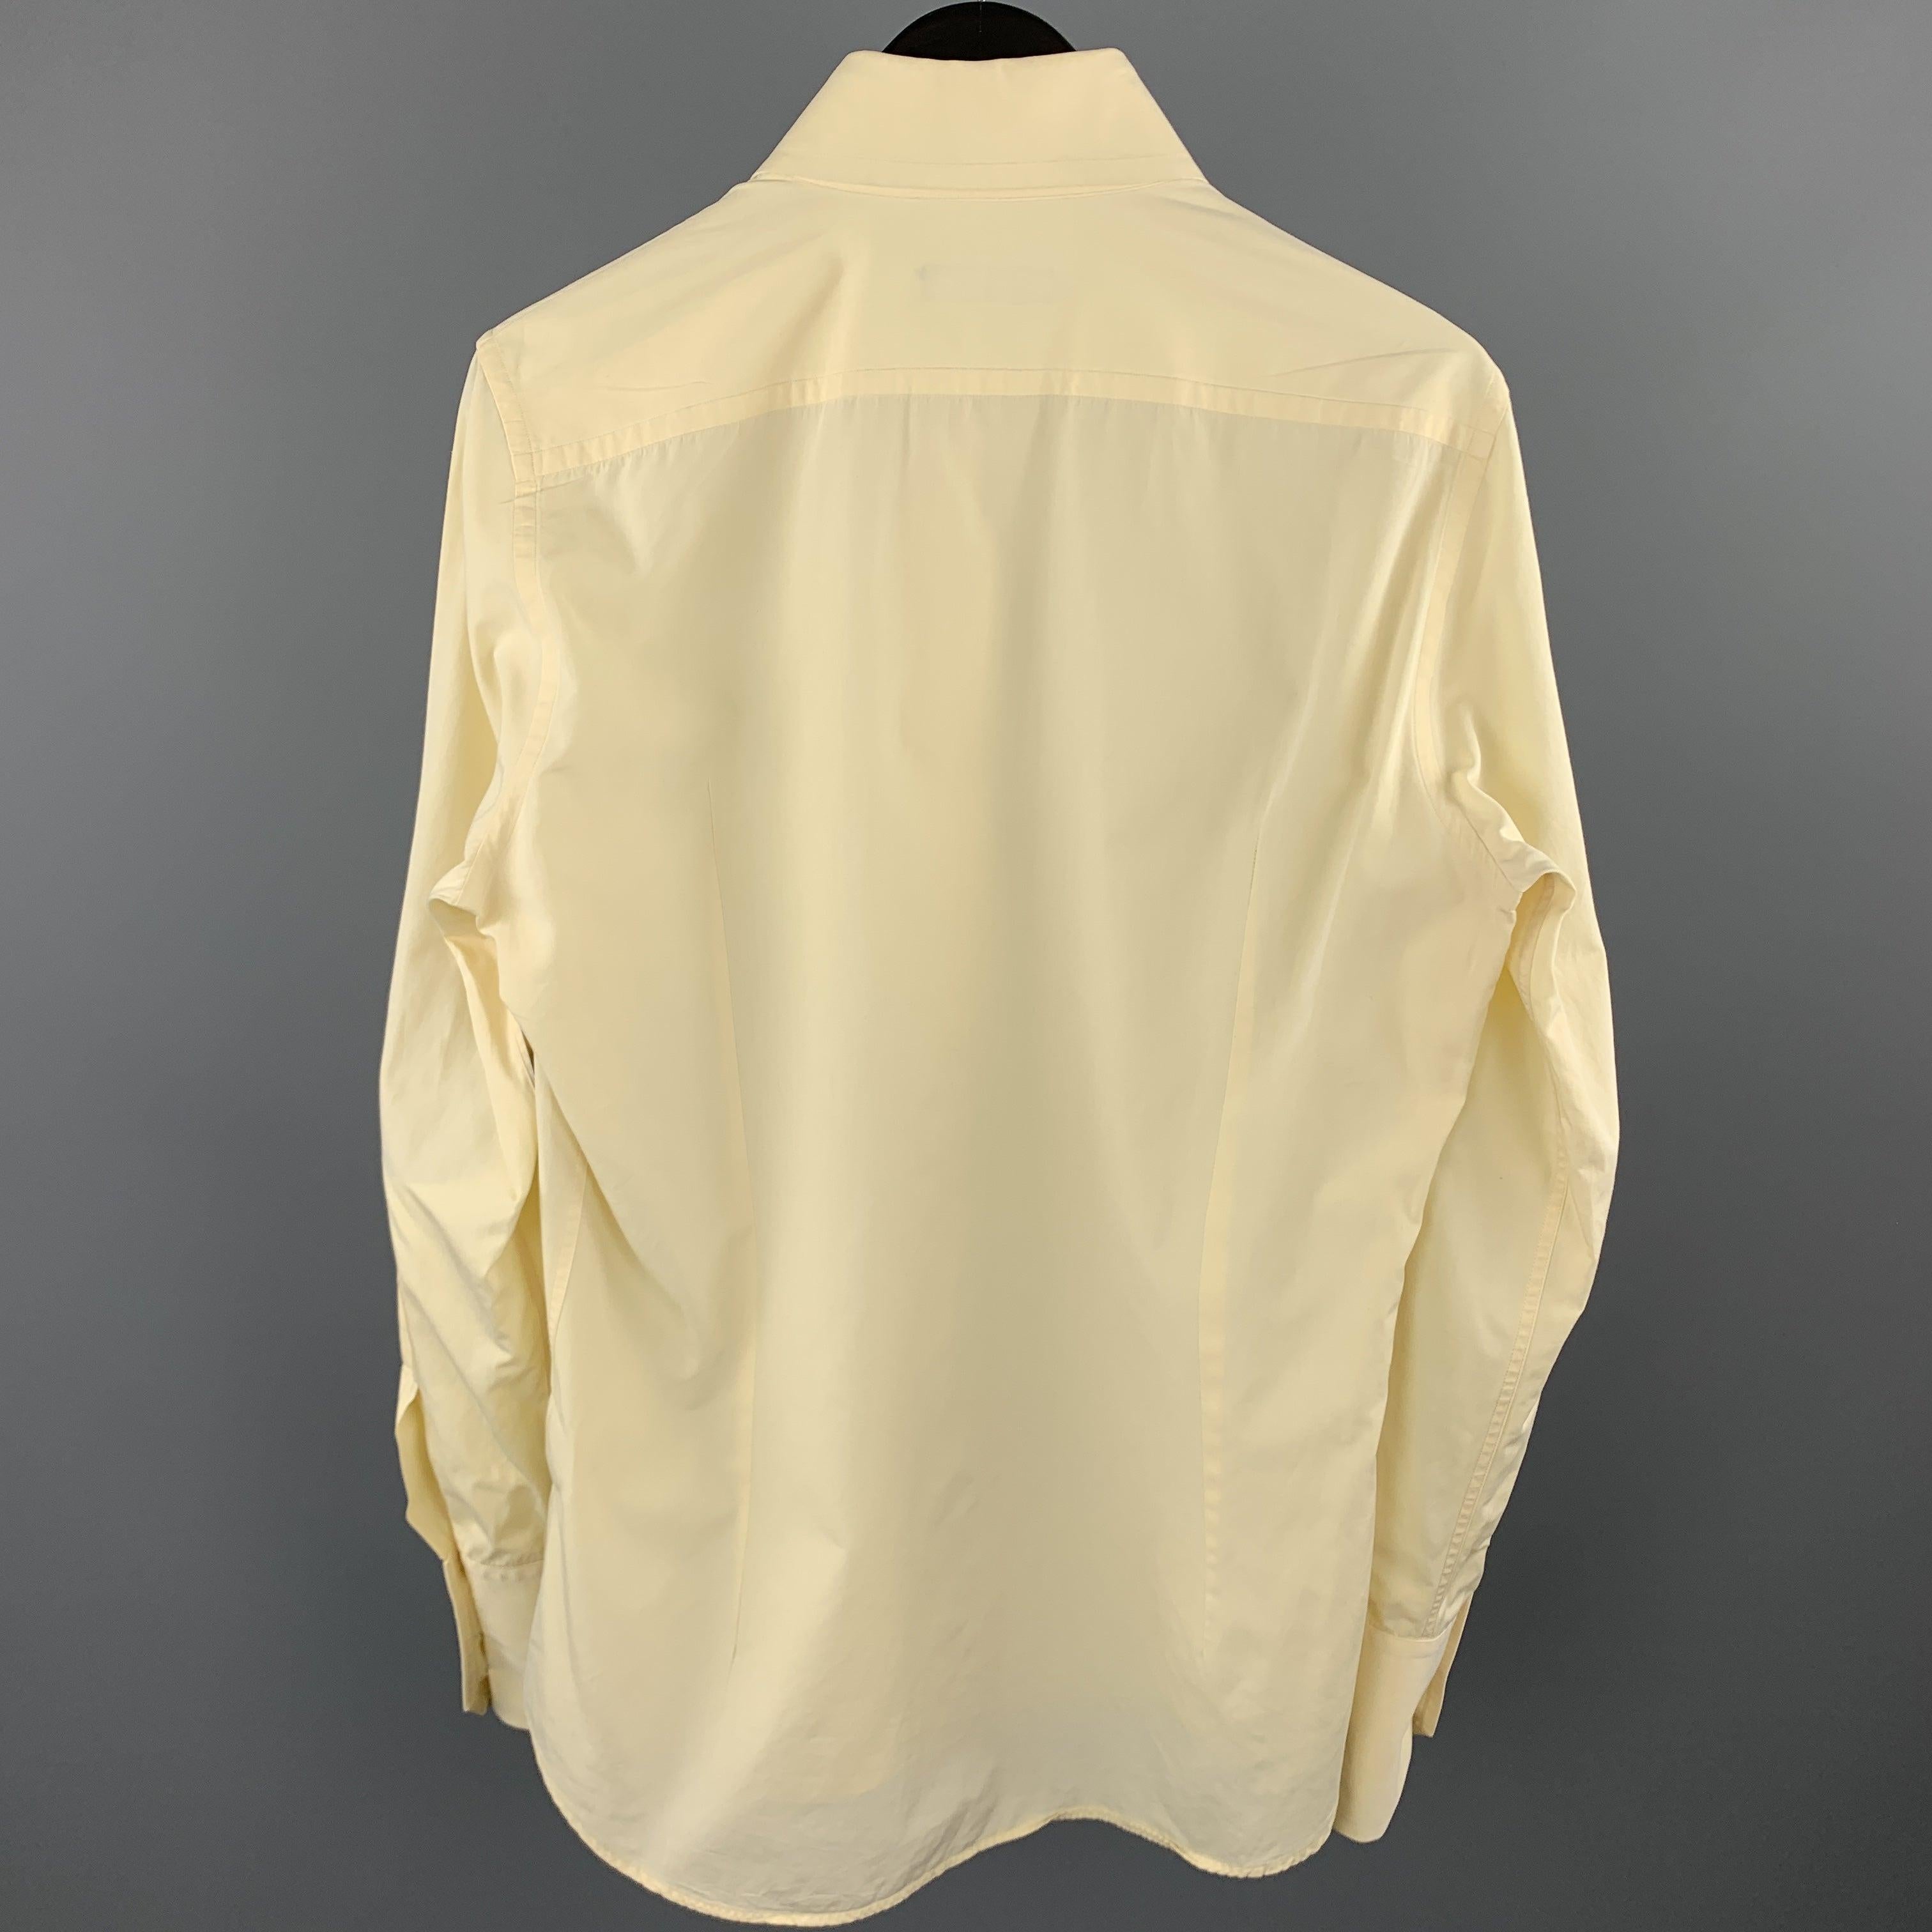 DSQUARED2 long sleeve shirt comes in a yellow cotton featuring a button up style and a spread collar. Made in Italy.Excellent
Pre-Owned Condition. 

Marked:   IT 48 

Measurements: 
 
Shoulder: 16 inches Chest: 41 inches 
Sleeve: 27.5 inches